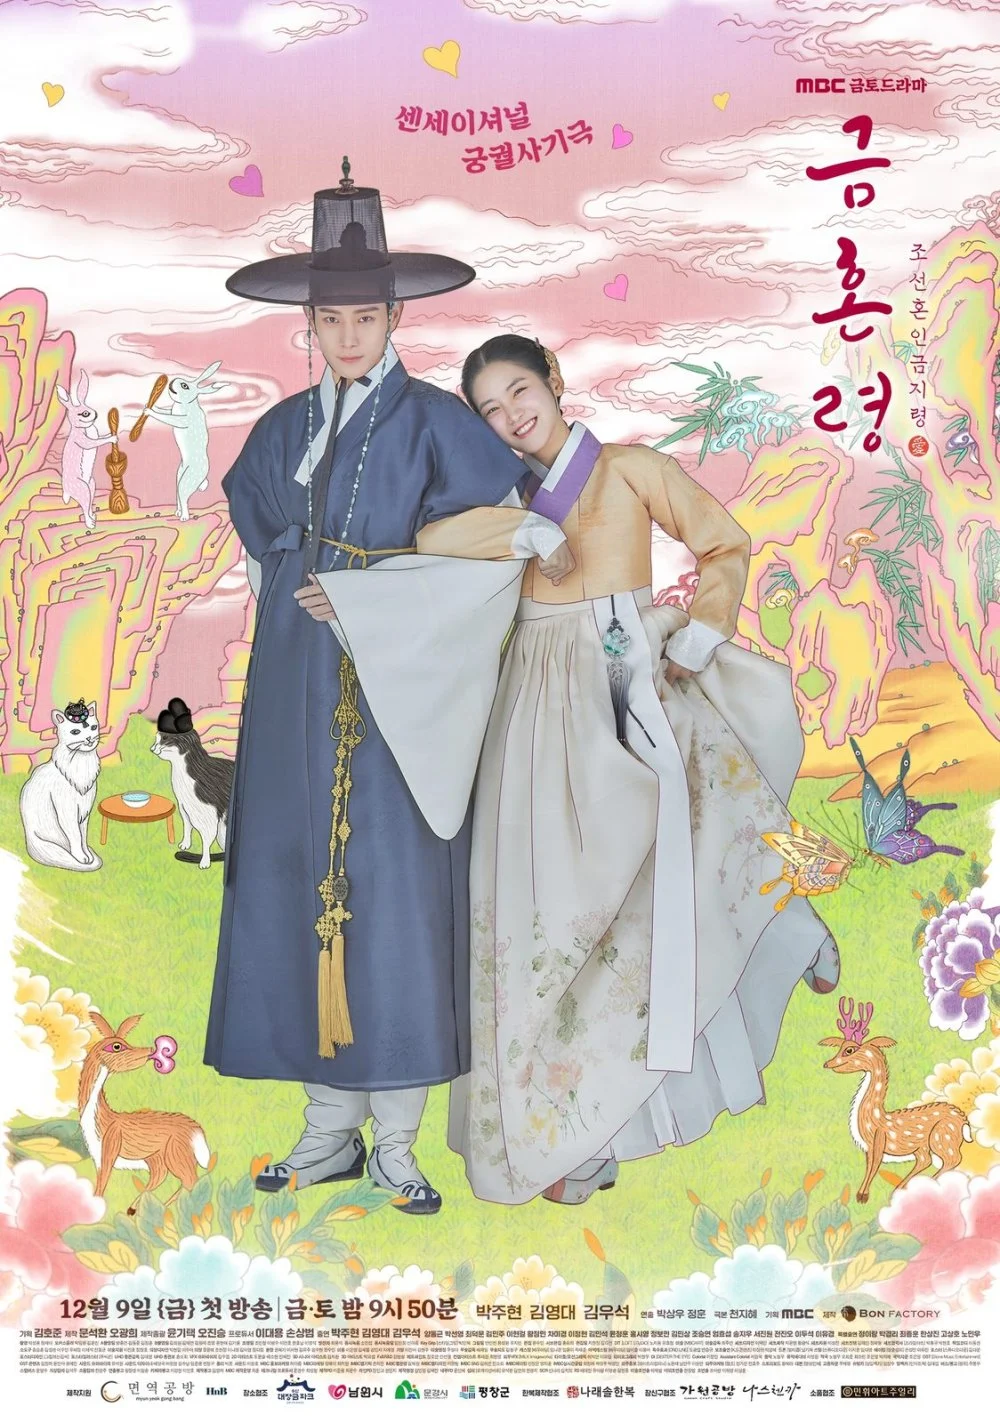 Poster of the TV series Marriage ban in Joseon/from open access